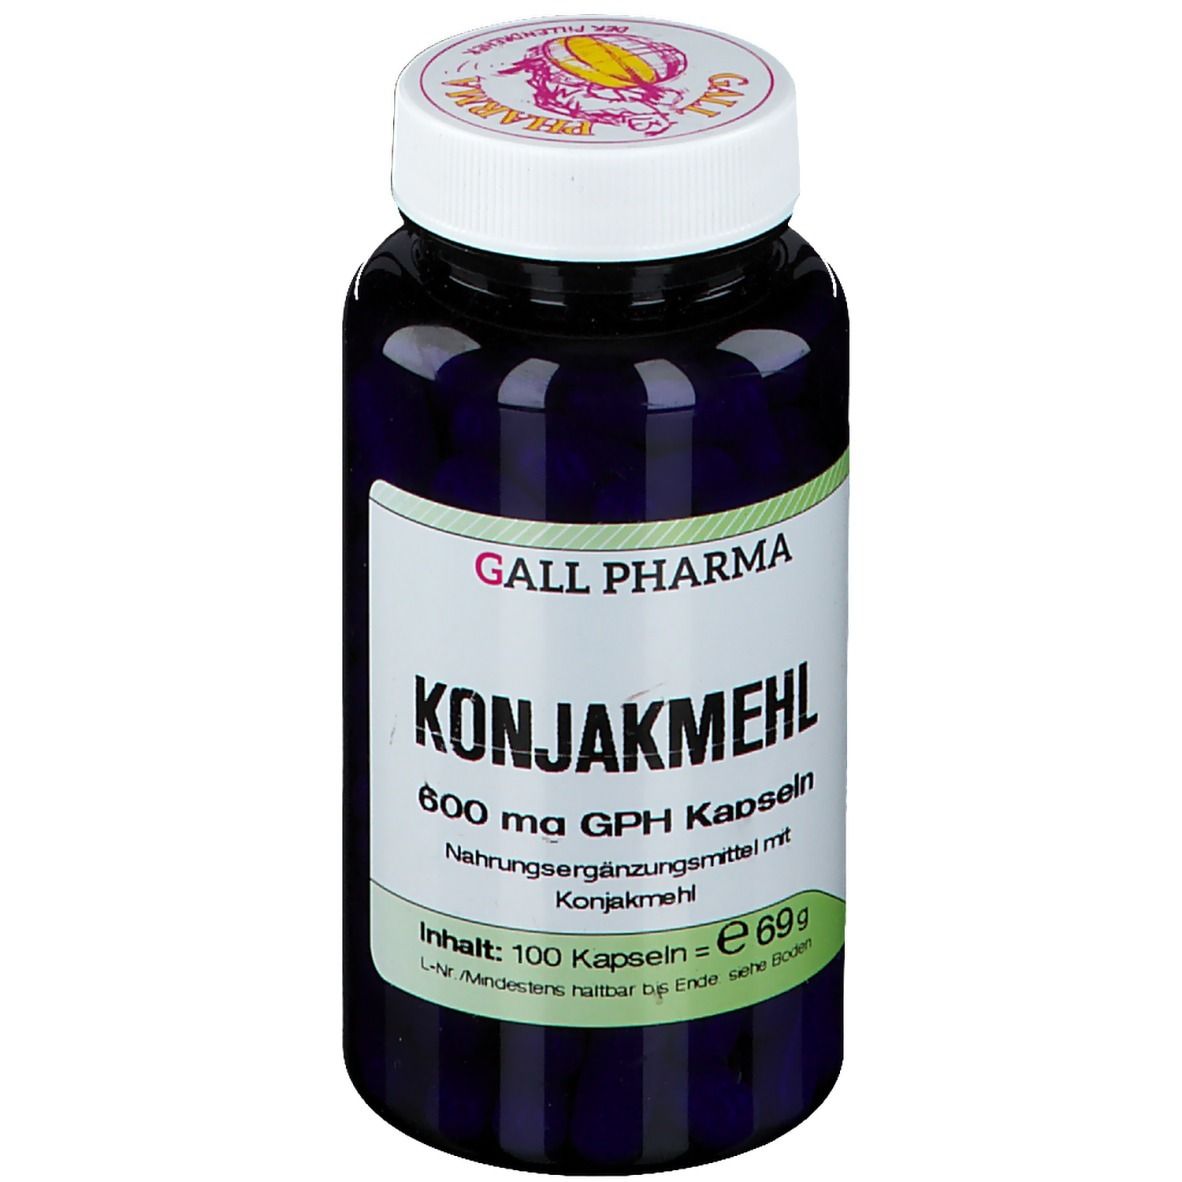 Image of Hecht Konjakmehl 600 mg